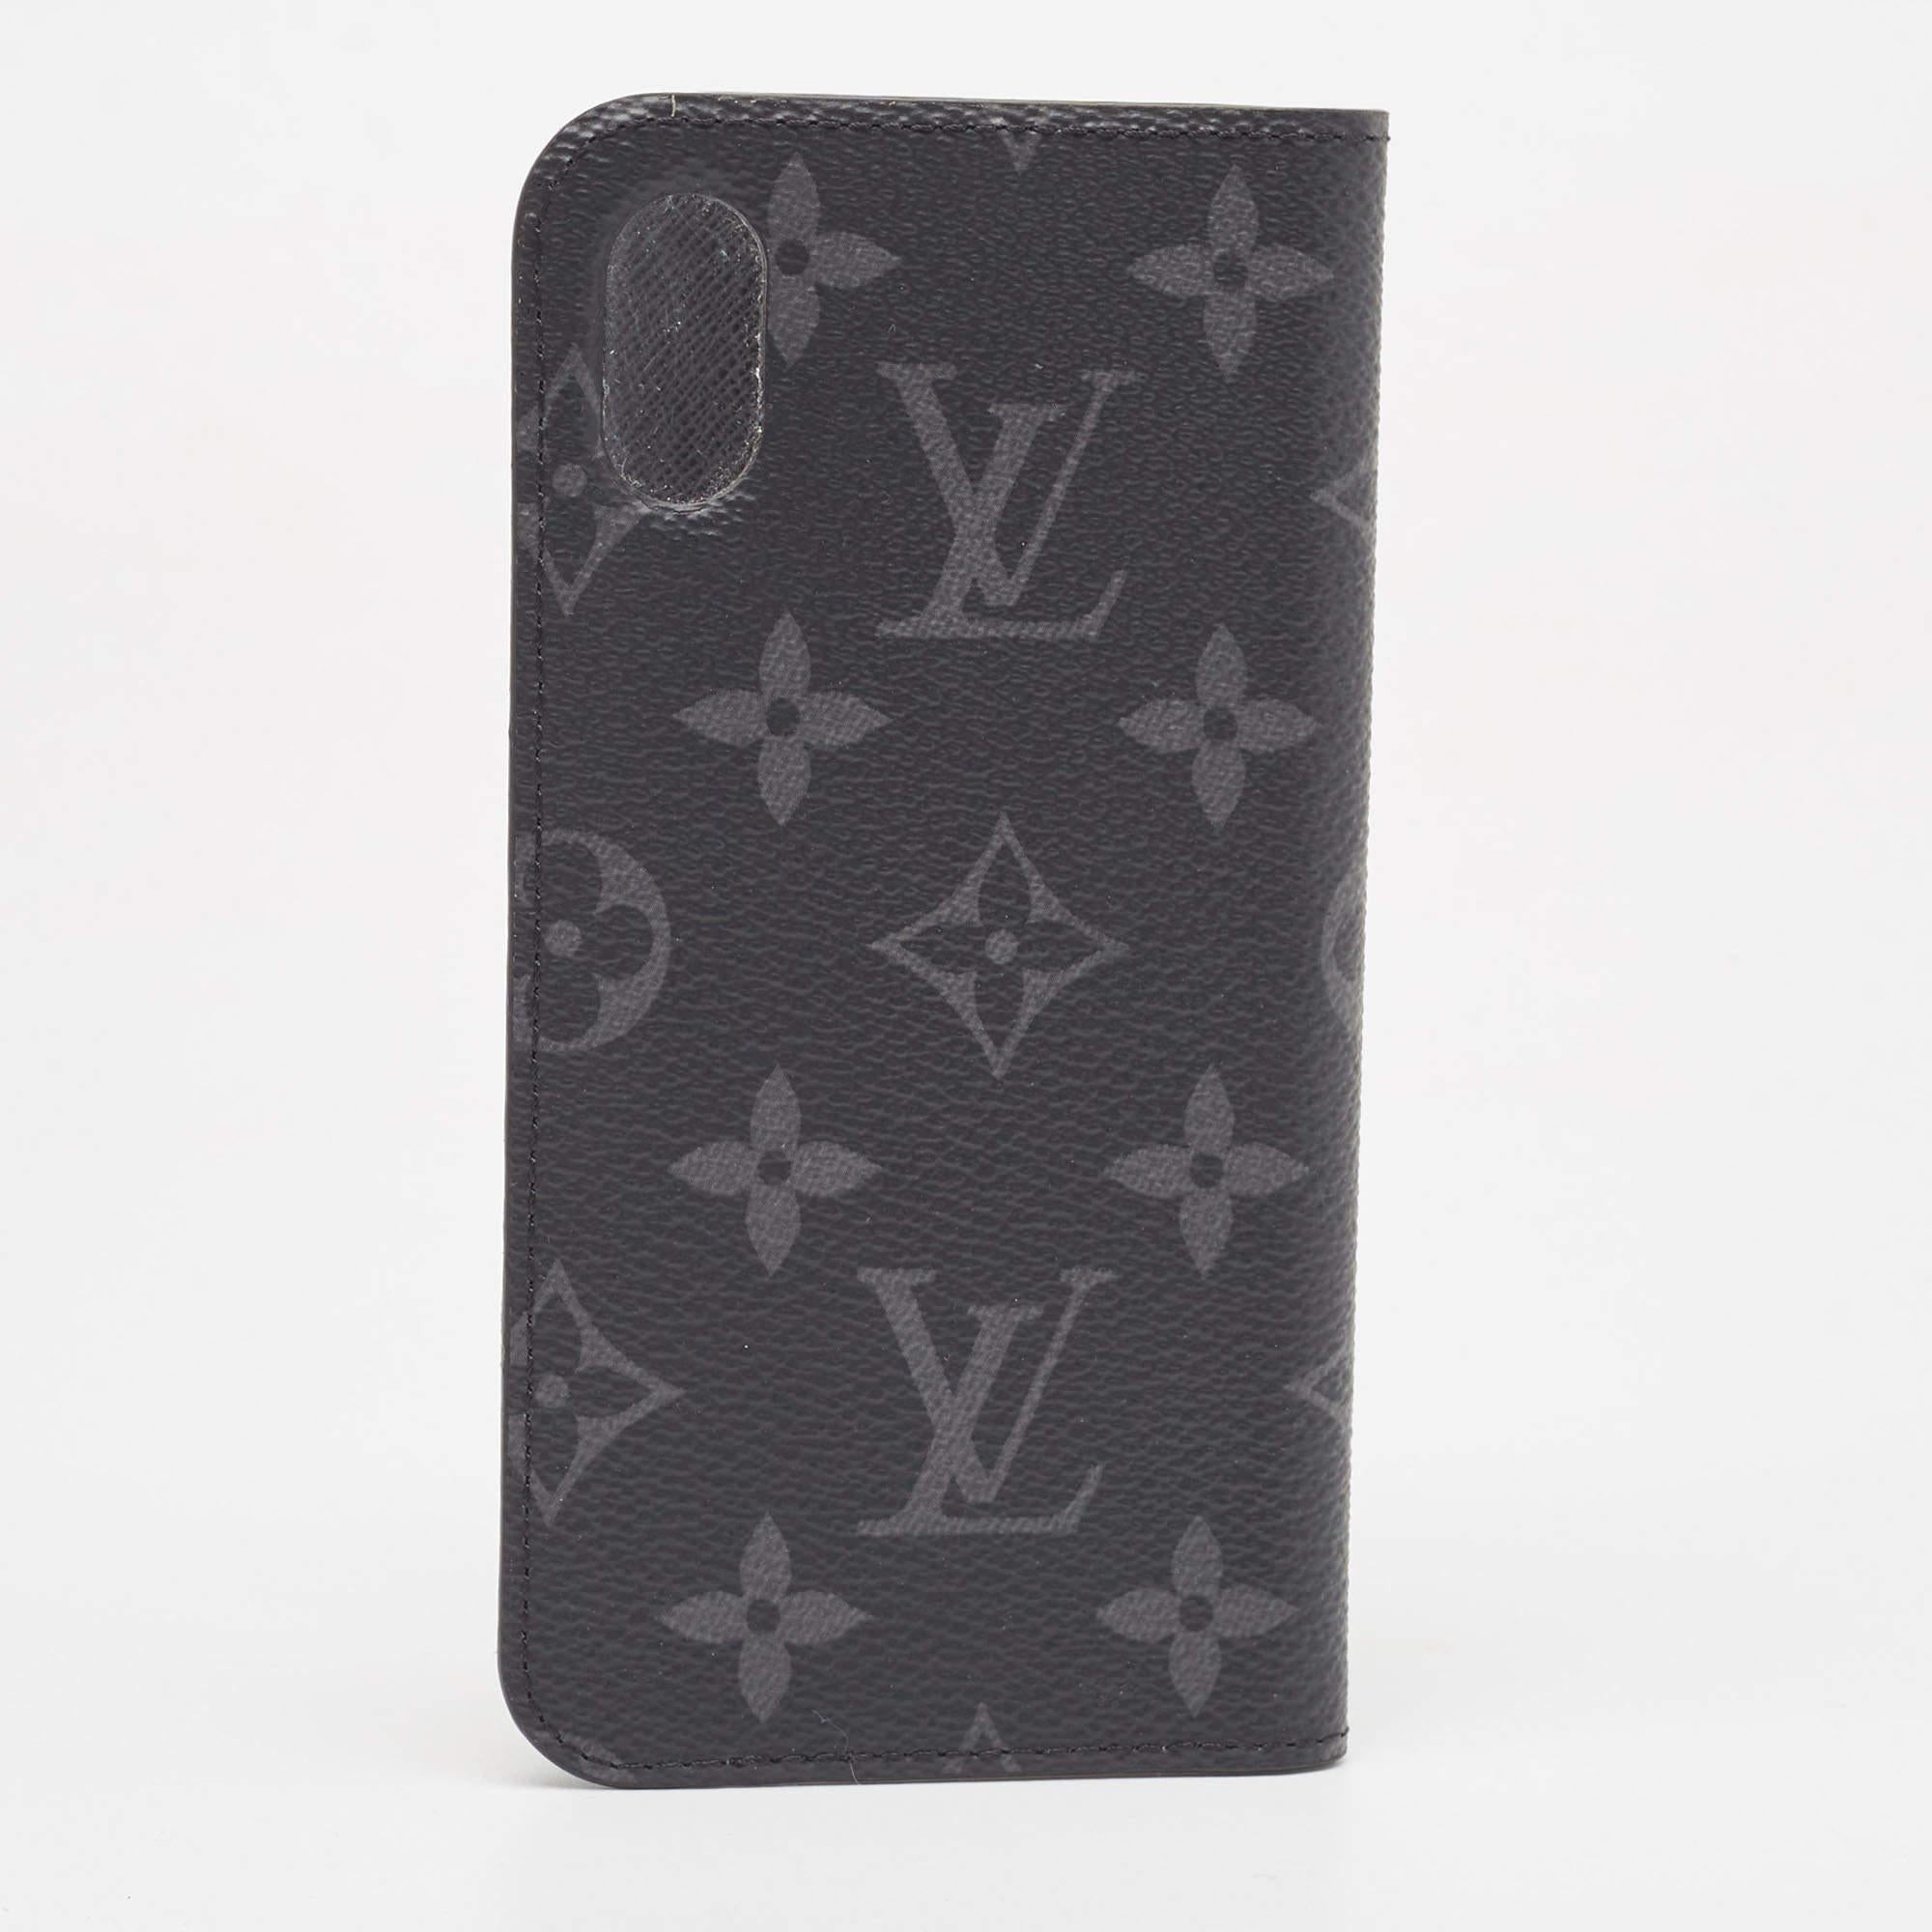 This iPhone X Folio case from the house of Louis Vuitton is an accessory you will love flaunting every day. Made of Monogram Eclipse canvas, it's a worthy investment.

